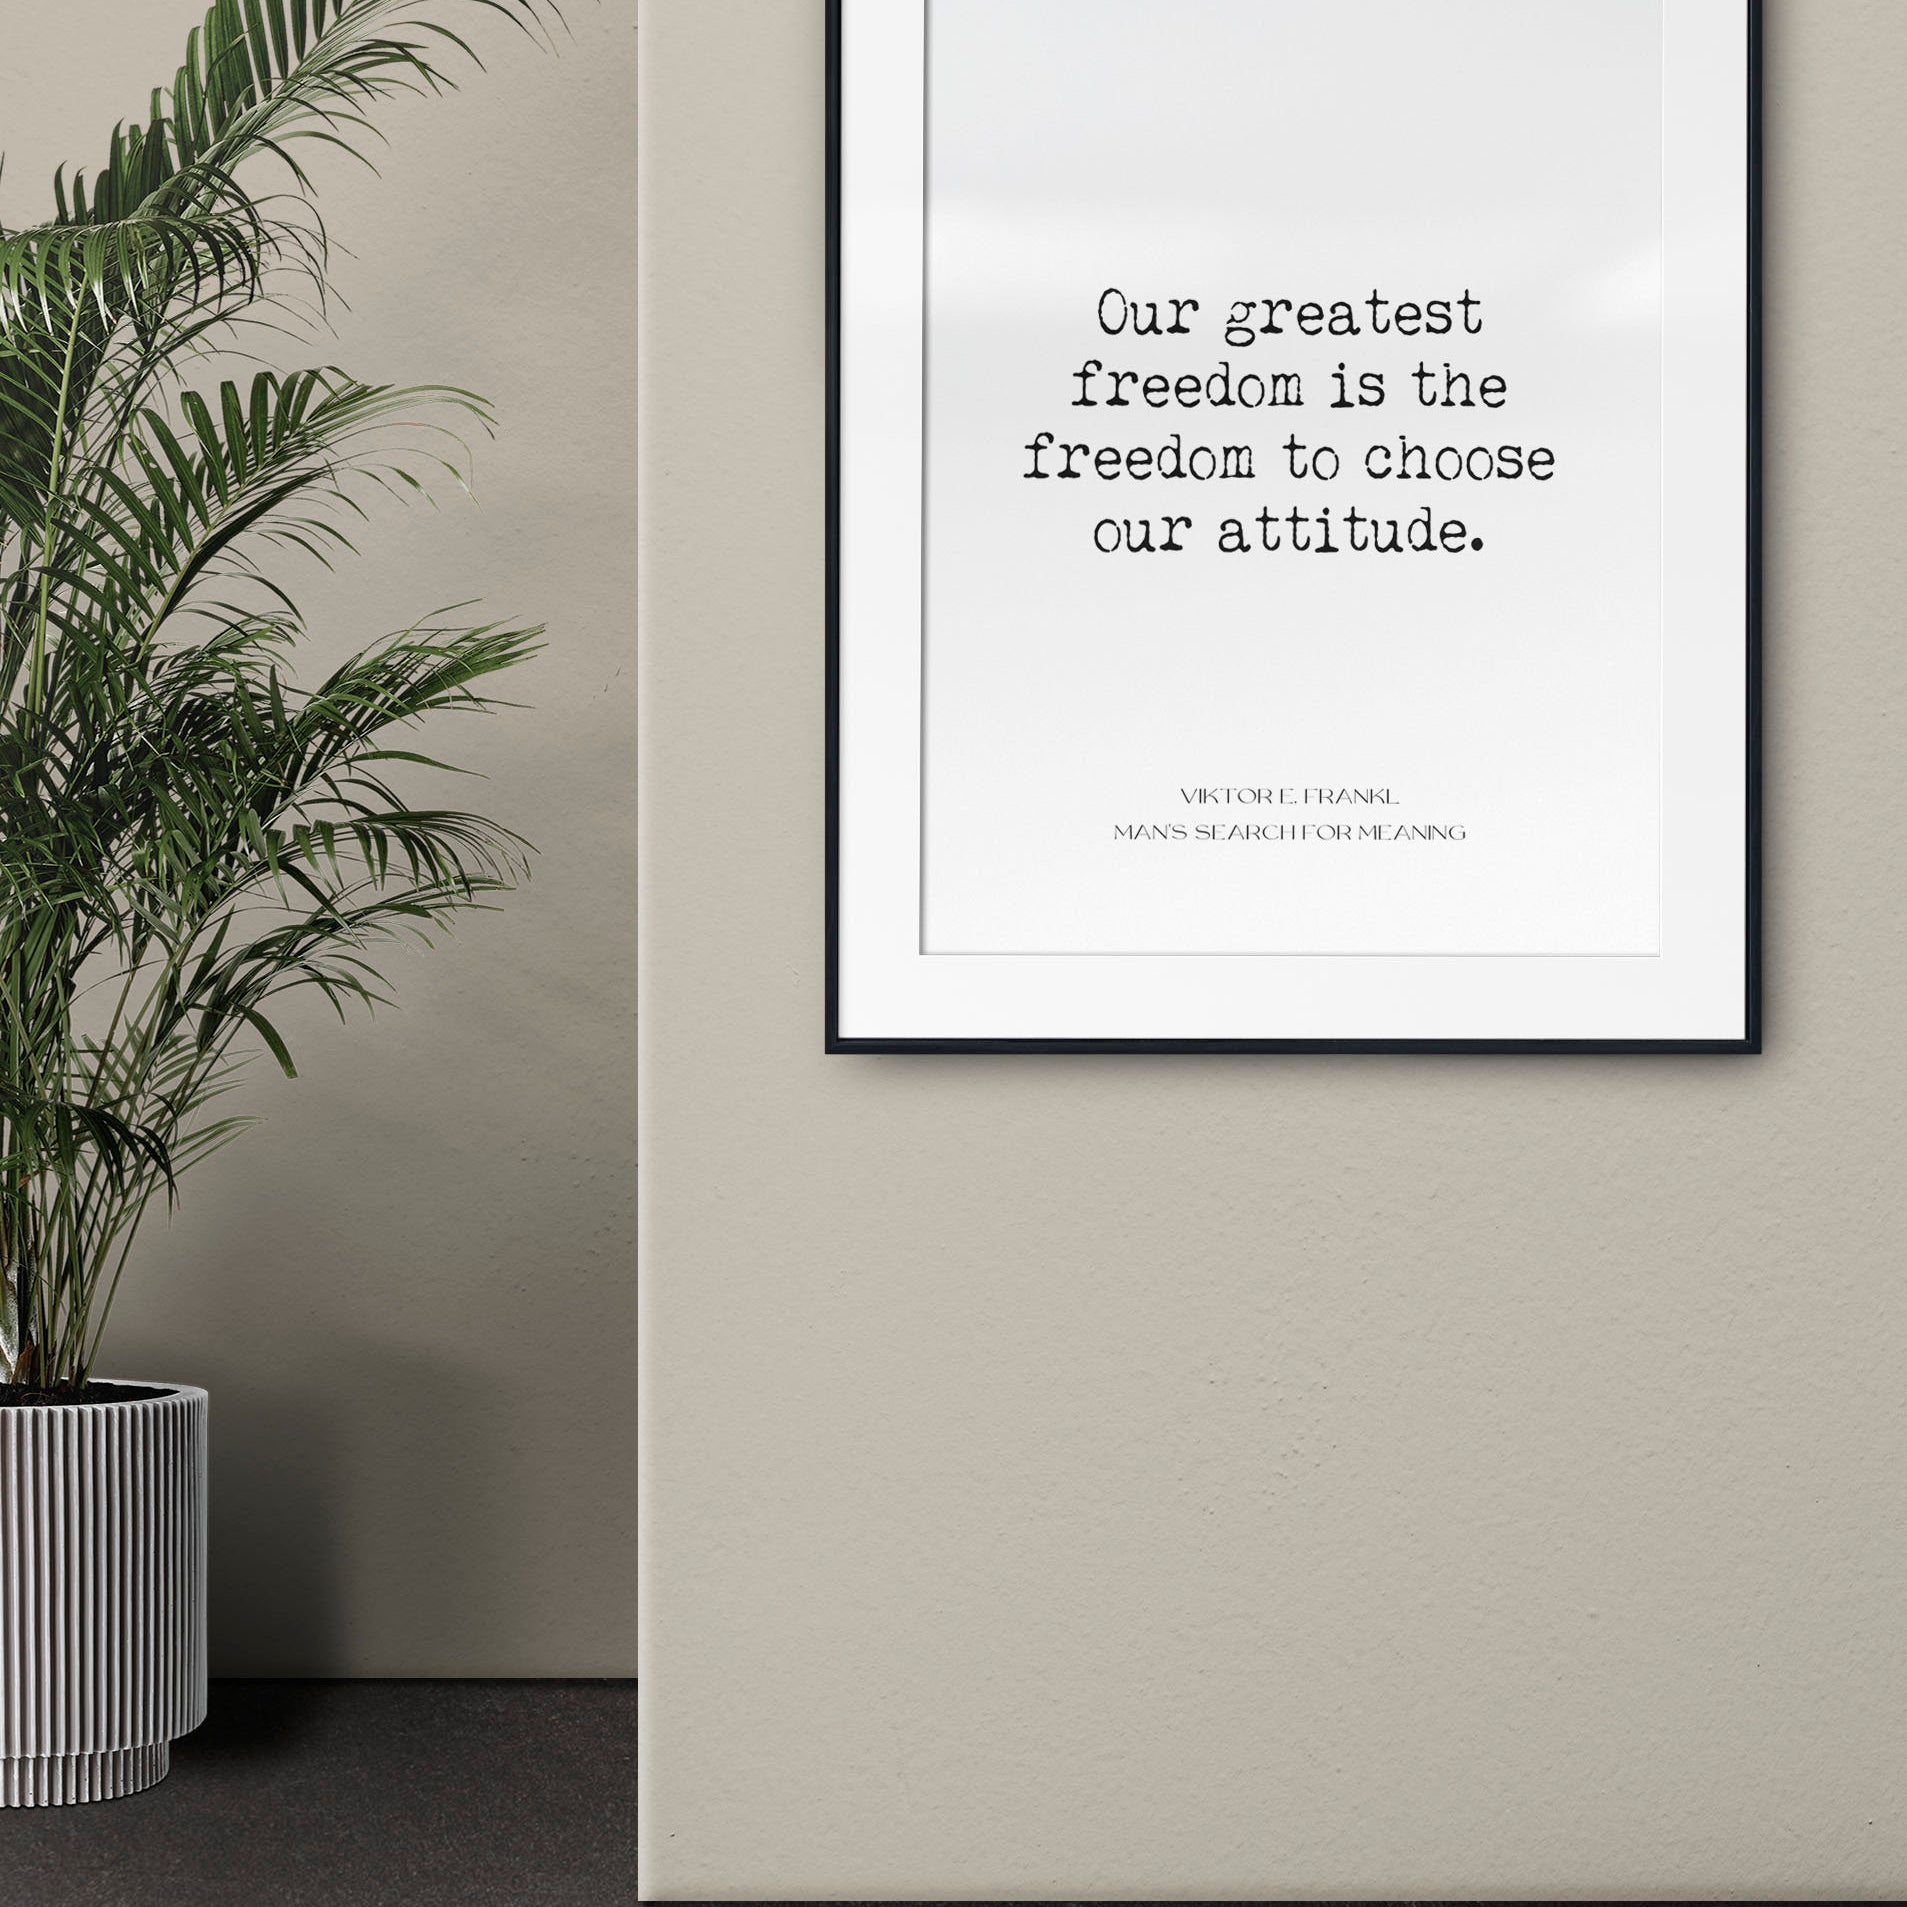 Viktor Frankl Inspirational Print, Our Greatest Freedom Is The Freedom To Choose Our Attitude Man's Search For Meaning